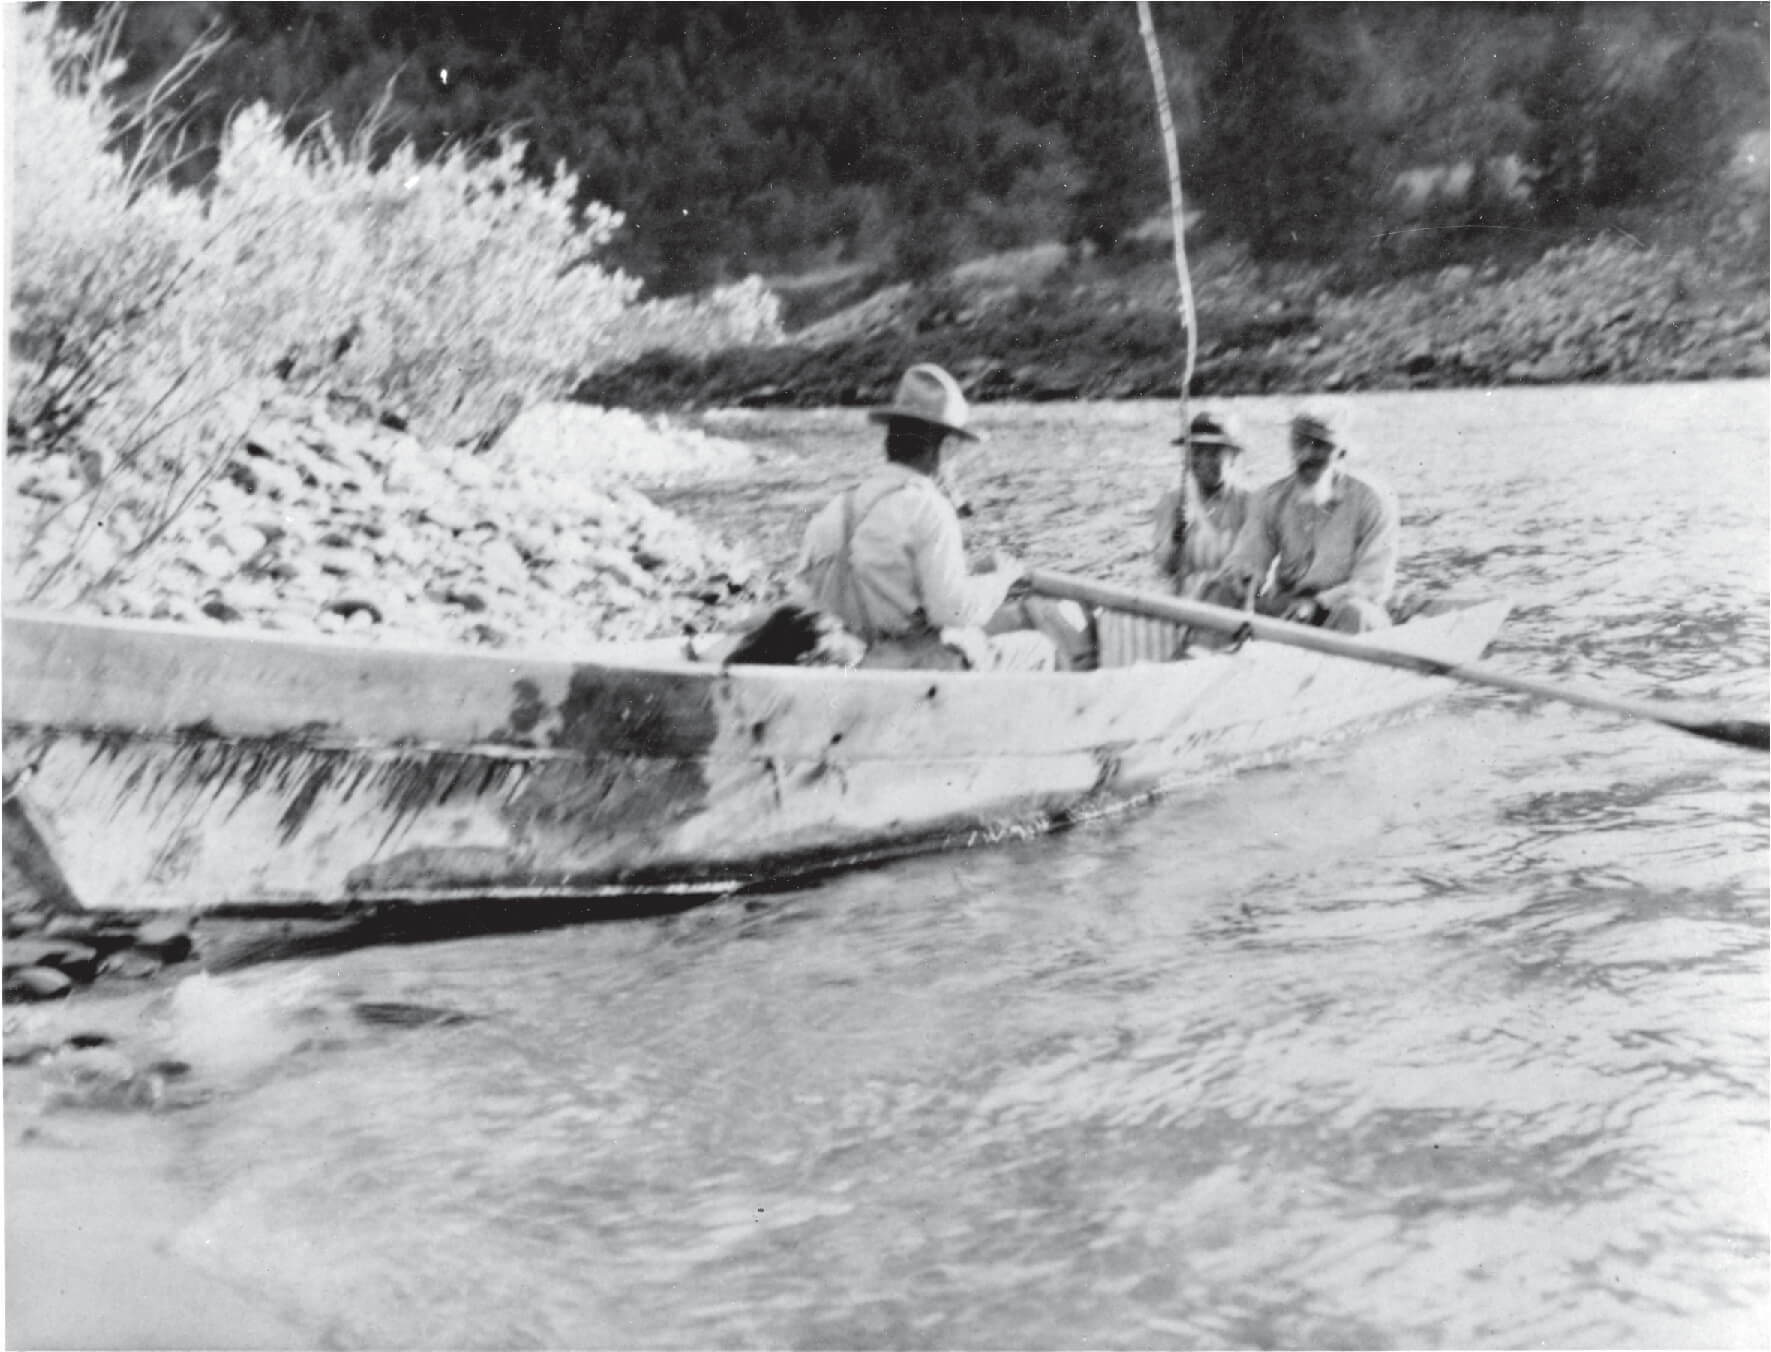 A black-and-white photo of Polly and Charlie Bemis setting out in a boat on the Salmon River with a third man paddling.